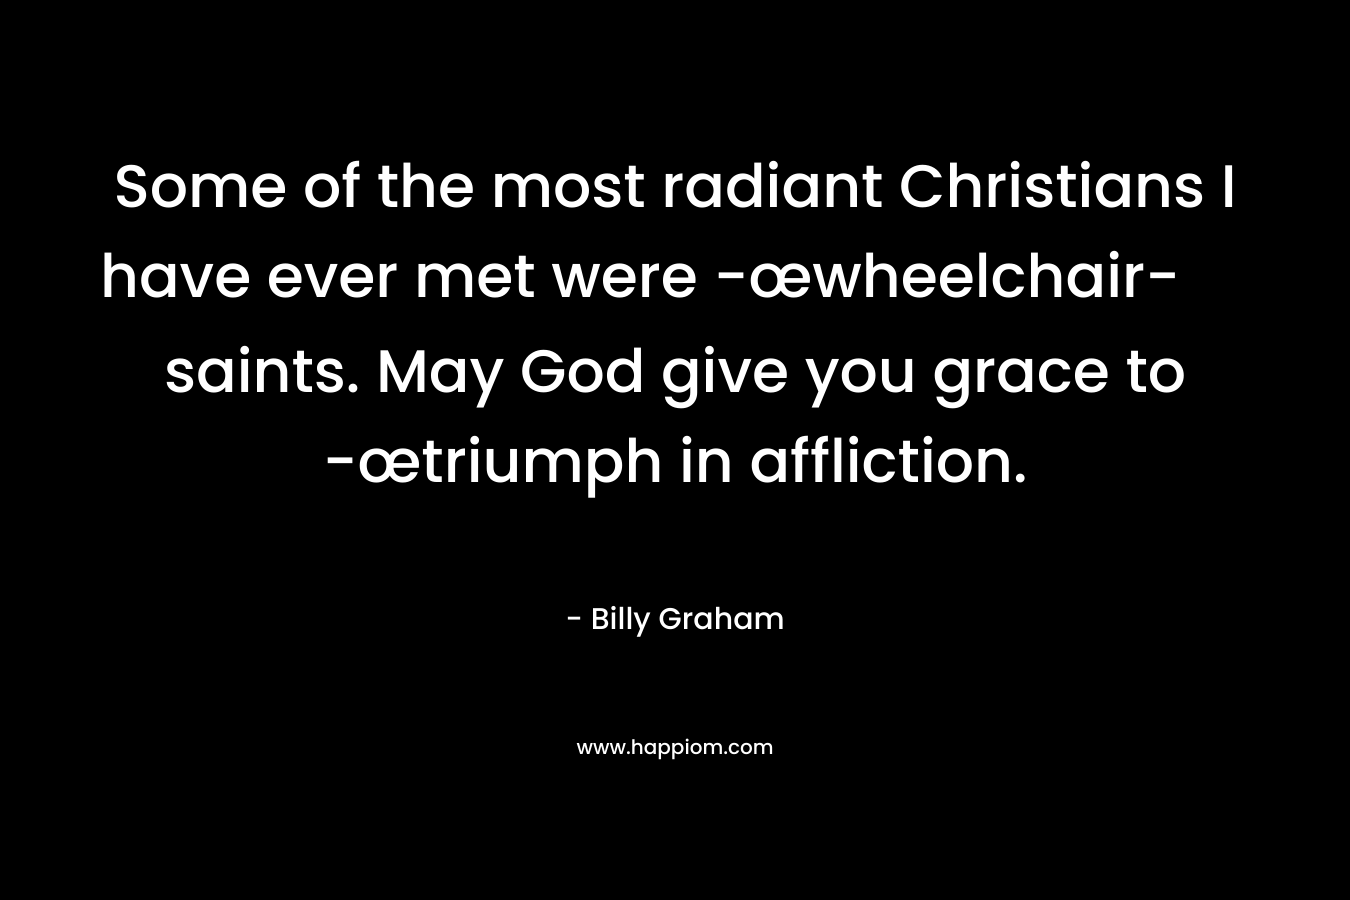 Some of the most radiant Christians I have ever met were -œwheelchair- saints. May God give you grace to -œtriumph in affliction.